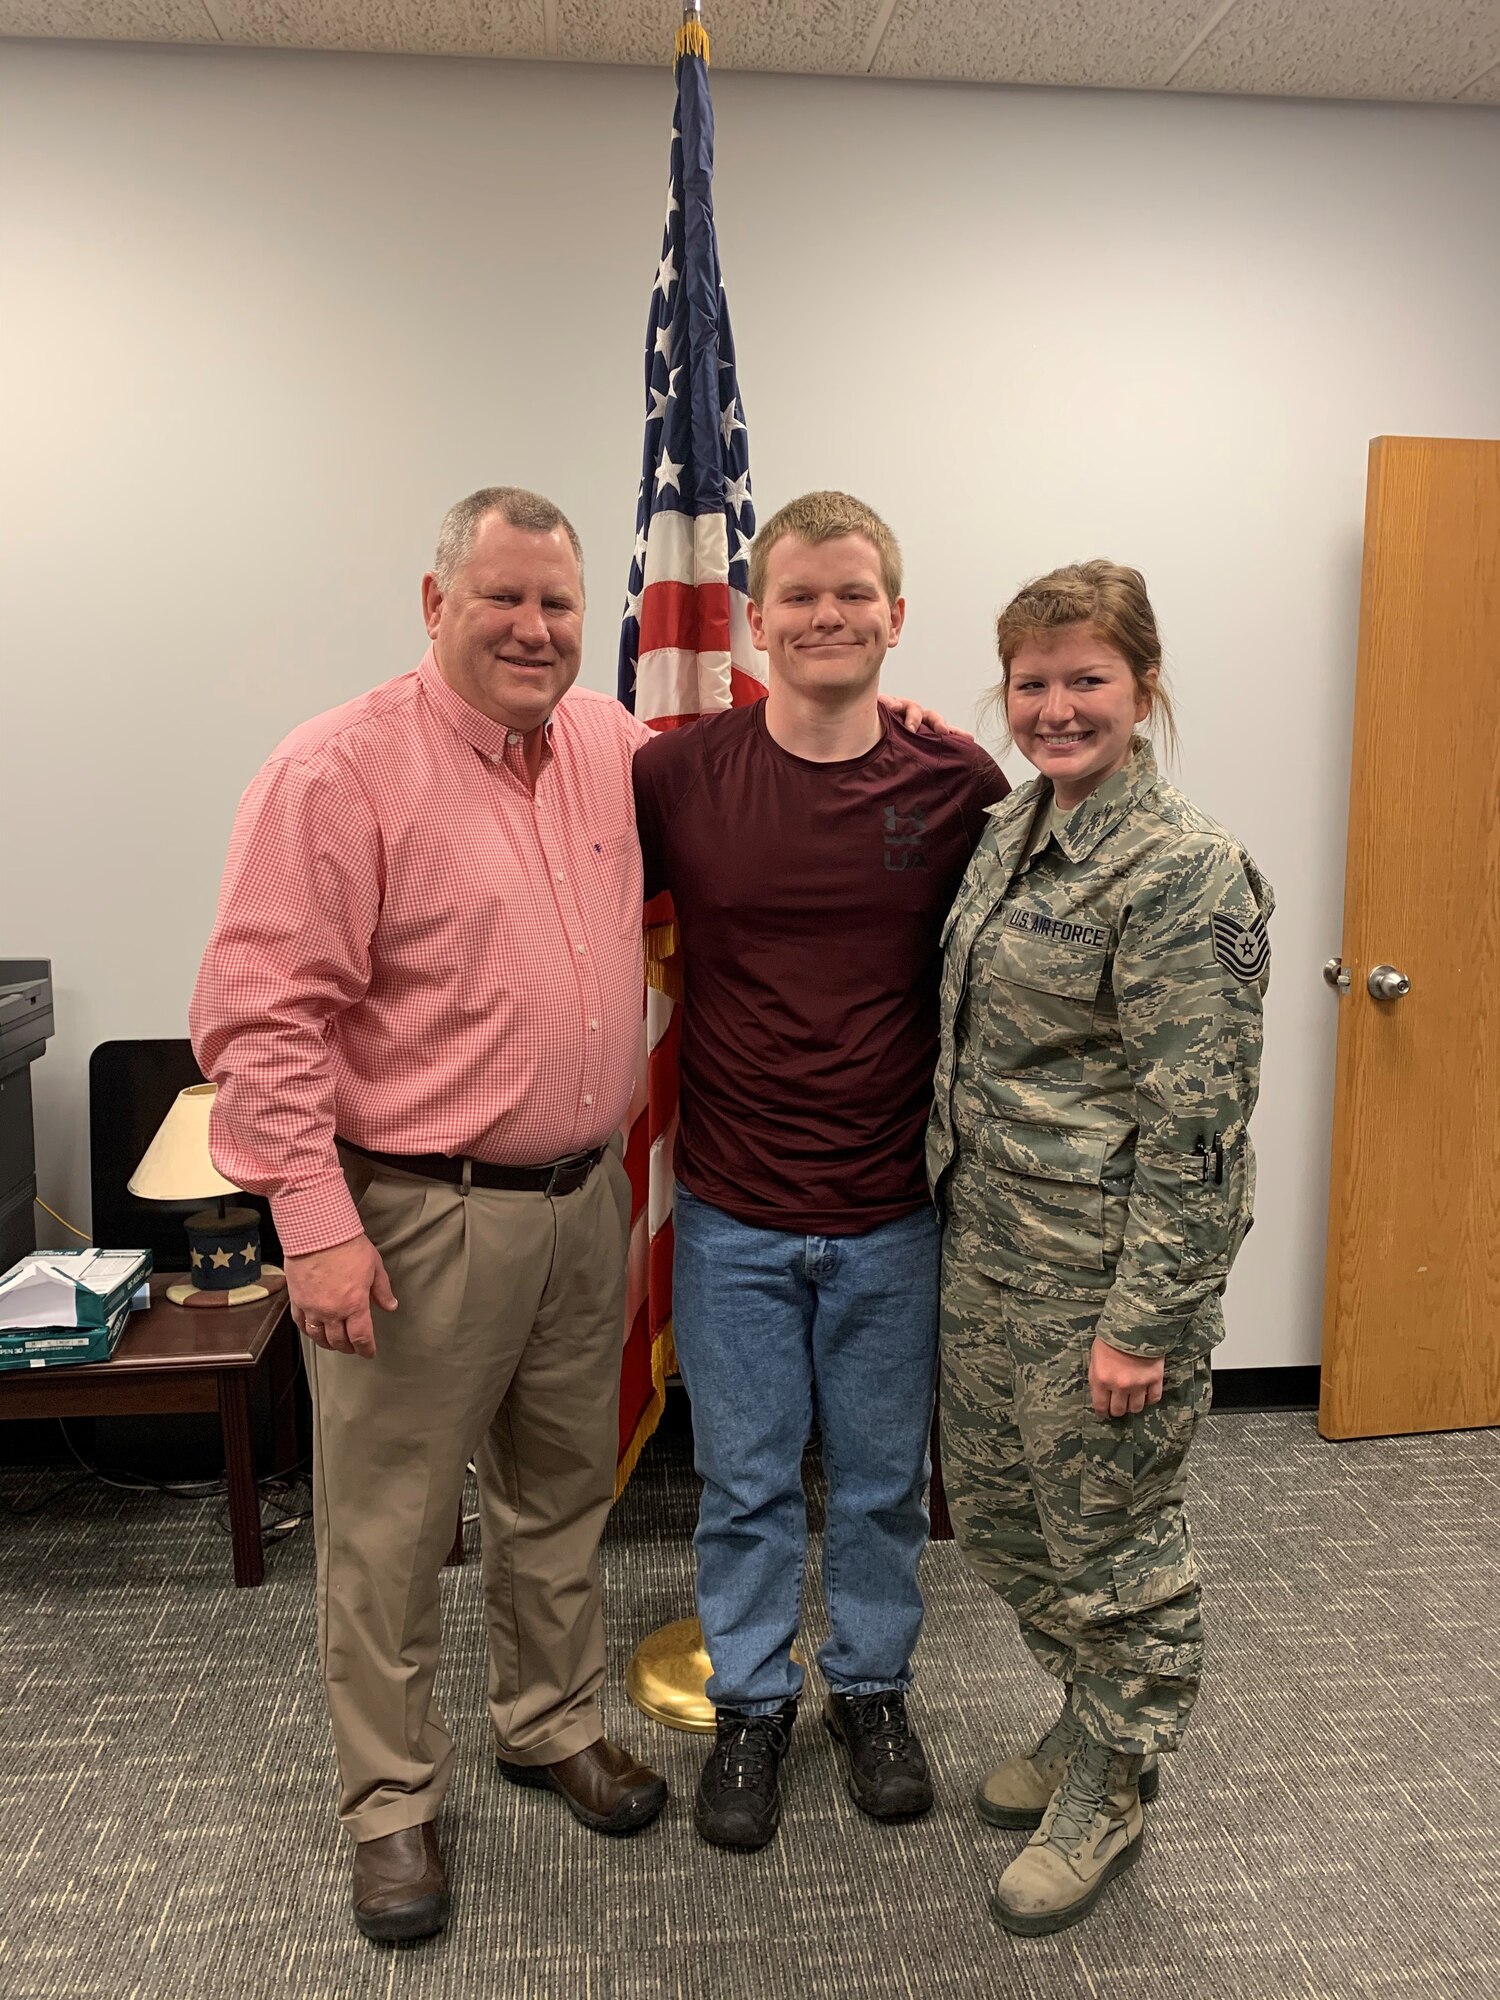 Chief Master Sgt. Kraig Konietzko (ret), Luke Konietzko and Tech. Sgt. Kristianna Konietzko pose for a photo after Luke takes the oath of enlistment at the 148th Fighter Wing in March 2020. (Courtesy Photo)